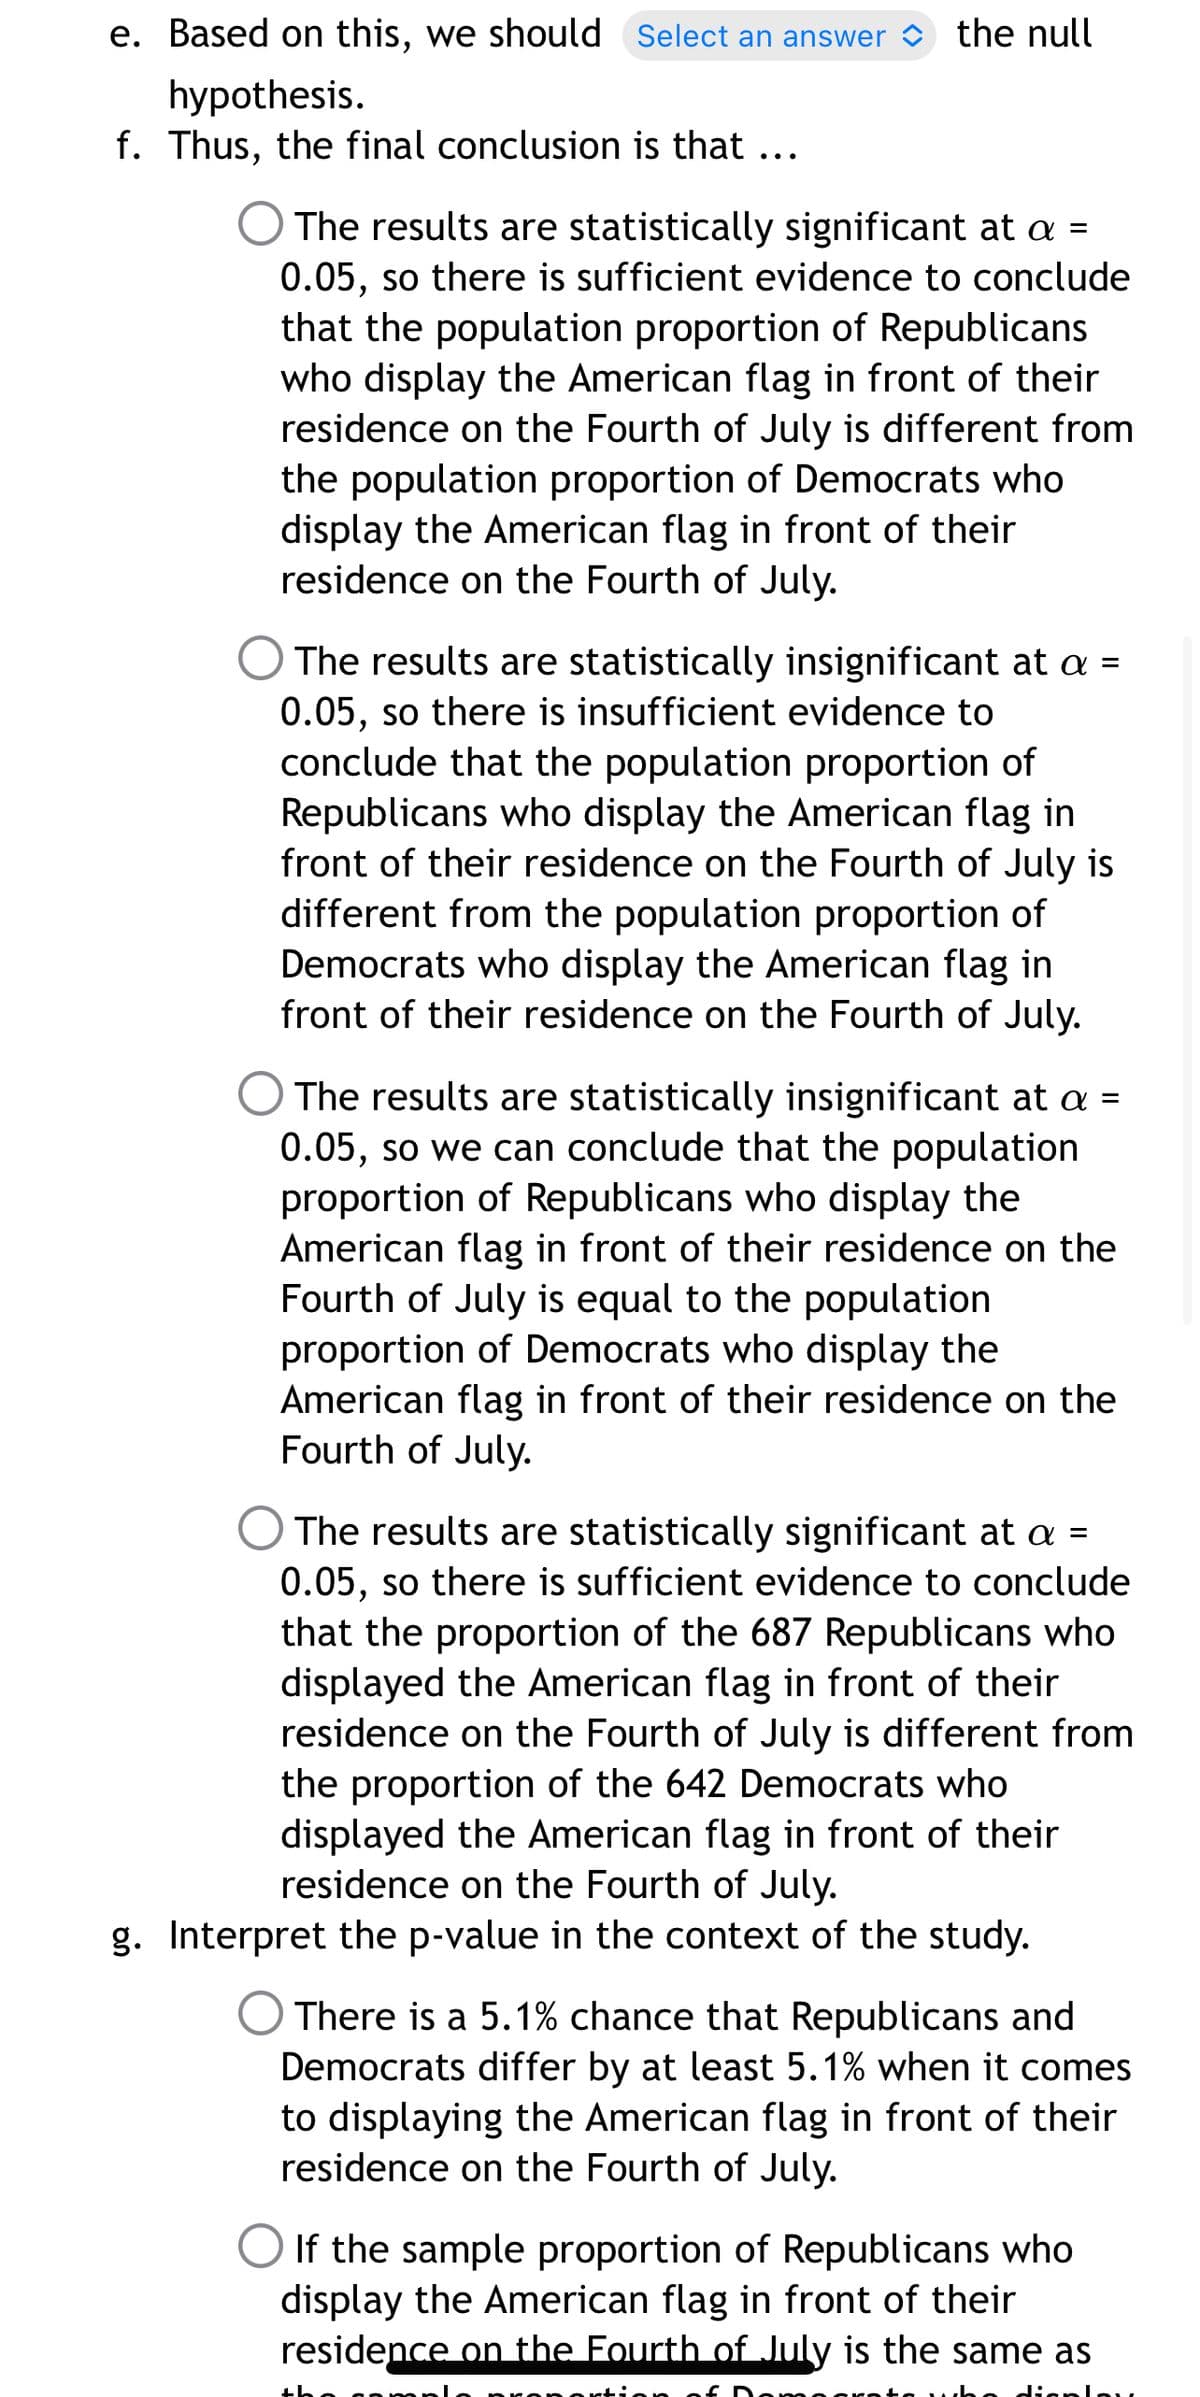 e. Based on this, we should Select an answer
the null
hypothesis.
f. Thus, the final conclusion is that ...
O The results are statistically significant at a =
0.05, so there is sufficient evidence to conclude
that the population proportion of Republicans
who display the American flag in front of their
residence on the Fourth of July is different from
the population proportion of Democrats who
display the American flag in front of their
residence on the Fourth of July.
The results are statistically insignificant at a =
0.05, so there is insufficient evidence to
conclude that the population proportion of
Republicans who display the American flag in
front of their residence on the Fourth of July is
different from the population proportion of
Democrats who display the American flag in
front of their residence on the Fourth of July.
O The results are statistically insignificant at a =
0.05, so we can conclude that the population
proportion of Republicans who display the
American flag in front of their residence on the
Fourth of July is equal to the population
proportion of Democrats who display the
American flag in front of their residence on the
Fourth of July.
The results are statistically significant at a =
0.05, so there is sufficient evidence to conclude
that the proportion of the 687 Republicans who
displayed the American flag in front of their
residence on the Fourth of July is different from
the proportion of the 642 Democrats who
displayed the American flag in front of their
residence on the Fourth of July.
g. Interpret the p-value in the context of the study.
There is a 5.1% chance that Republicans and
Democrats differ by at least 5.1% when it comes
to displaying the American flag in front of their
residence on the Fourth of July.
If the sample proportion of Republicans who
display the American flag in front of their
residence on the Fourth of July is the same as
